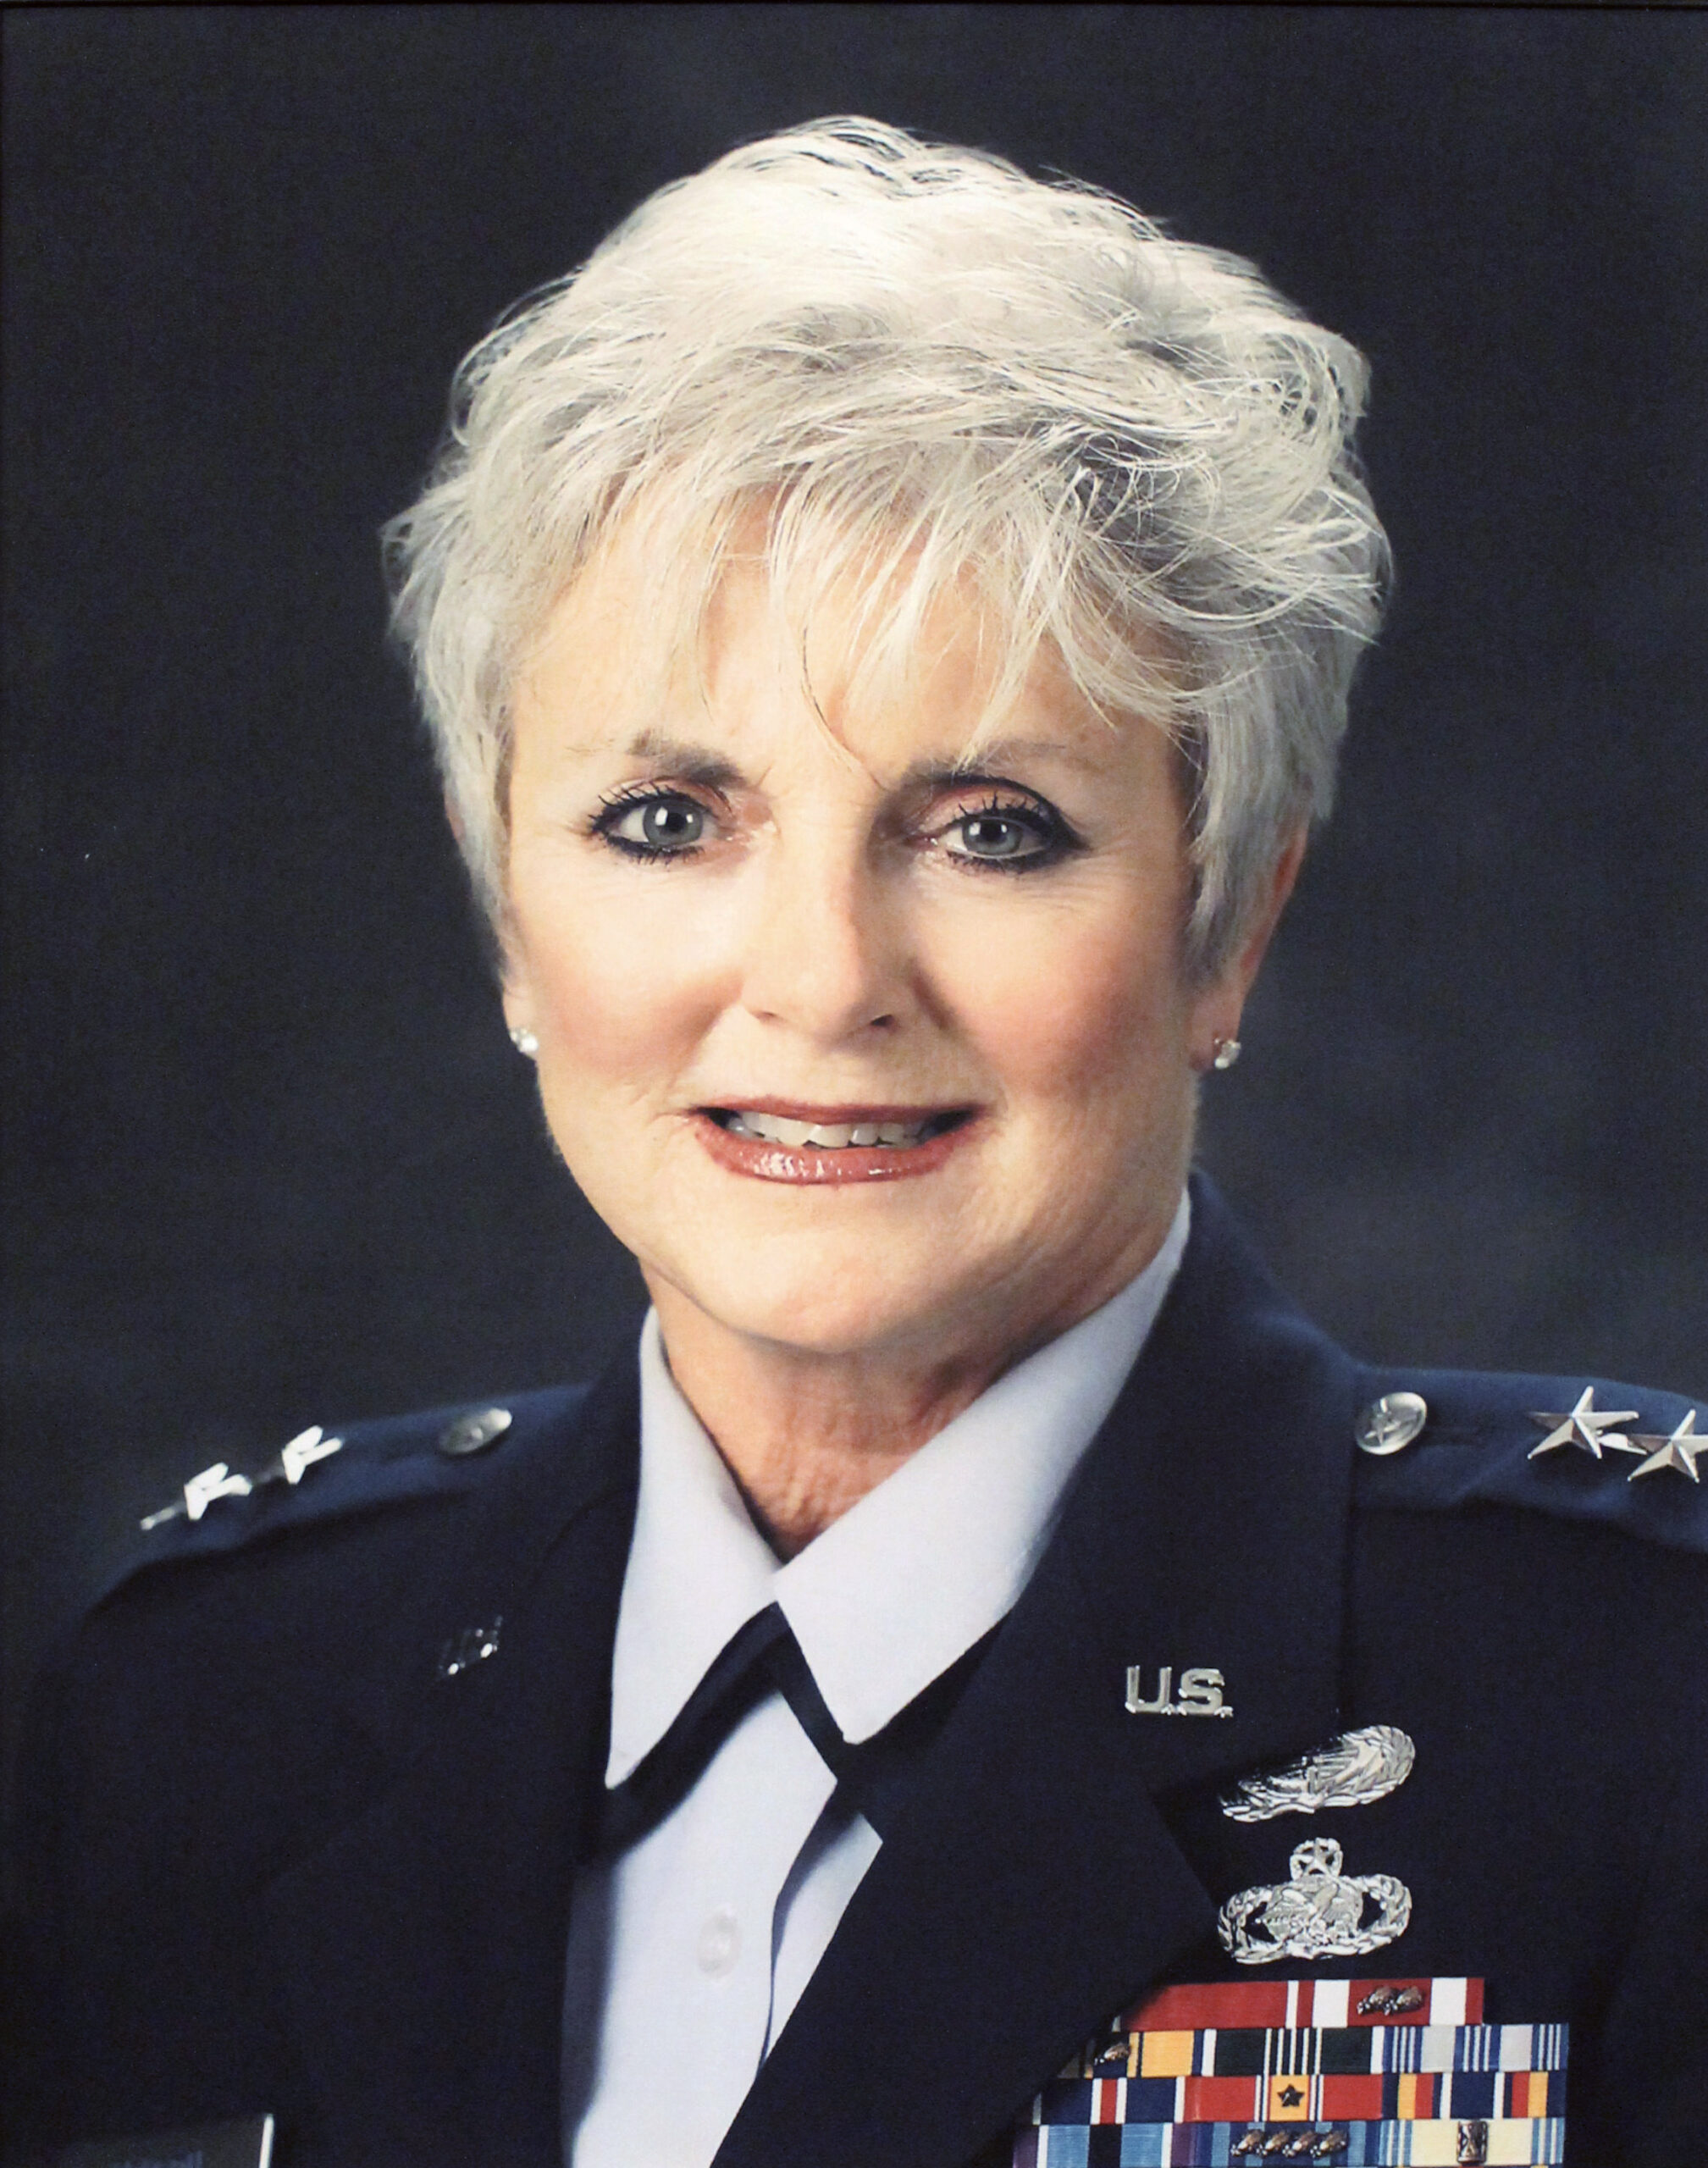 New scholarship available this spring in honor of former Major General